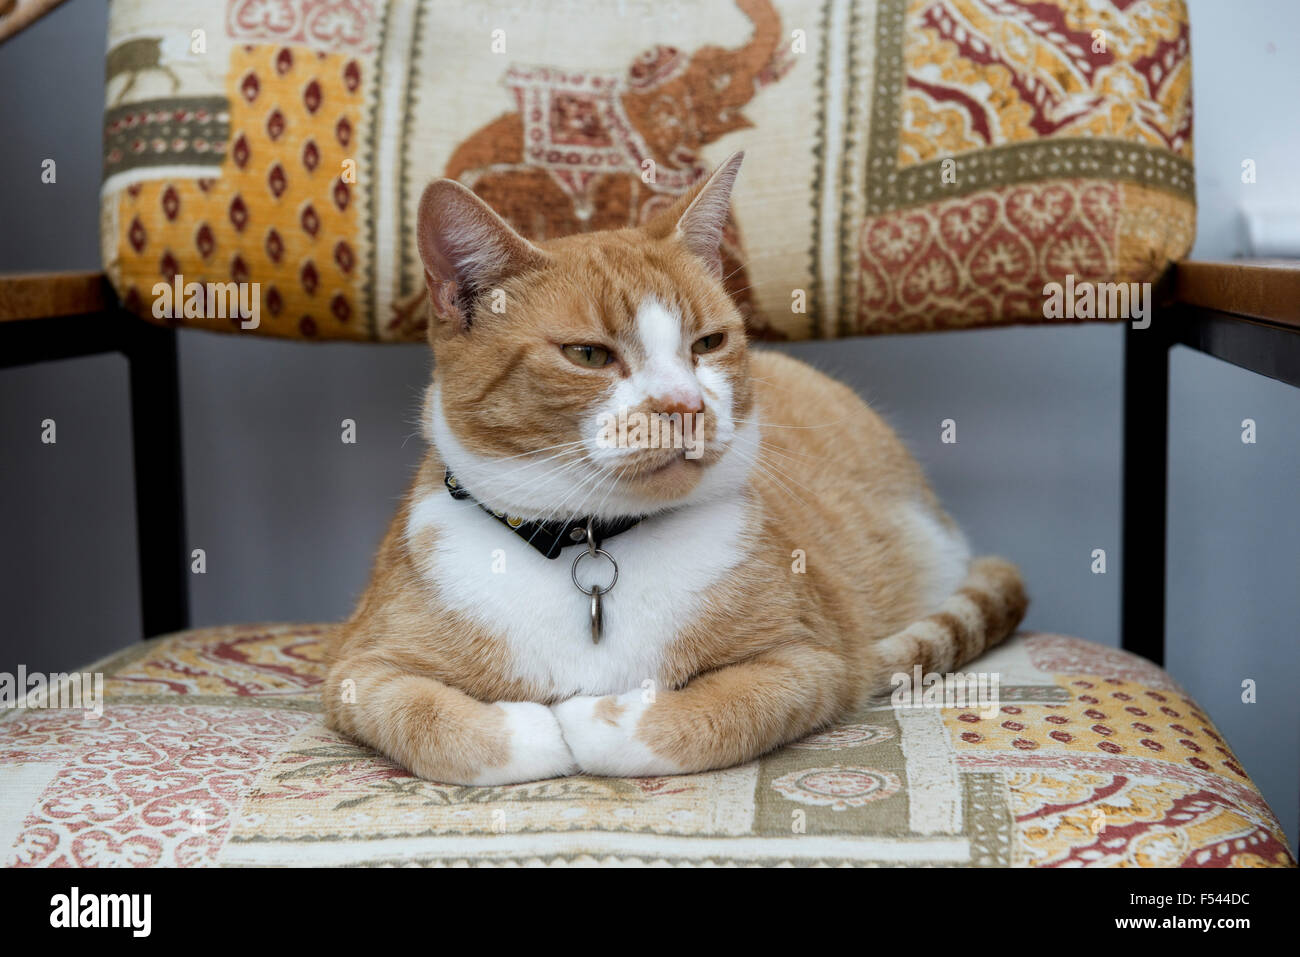 A ginger or marmalade domestic pet cat contentedly sitting on a chair with her eyes closed and paws folded Stock Photo